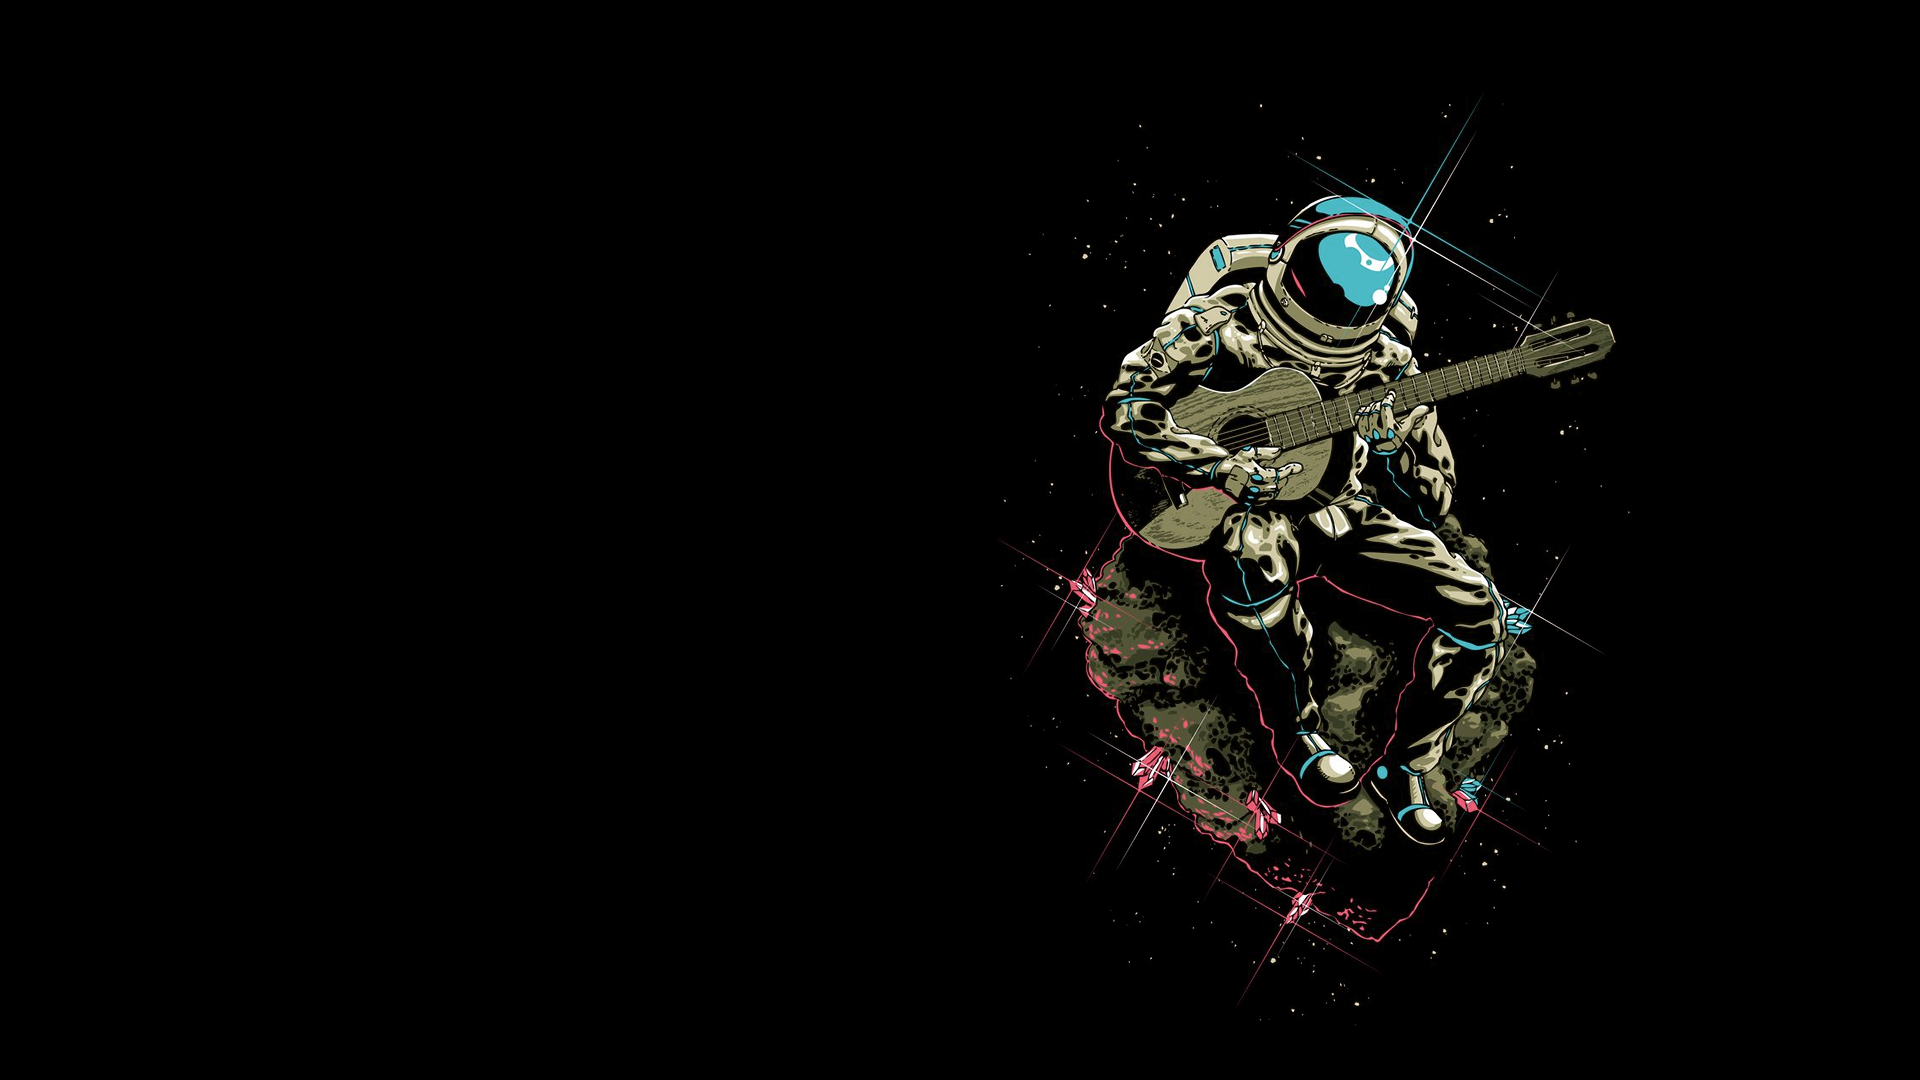 Aesthetic Astronaut PC Wallpapers  Wallpaper Cave